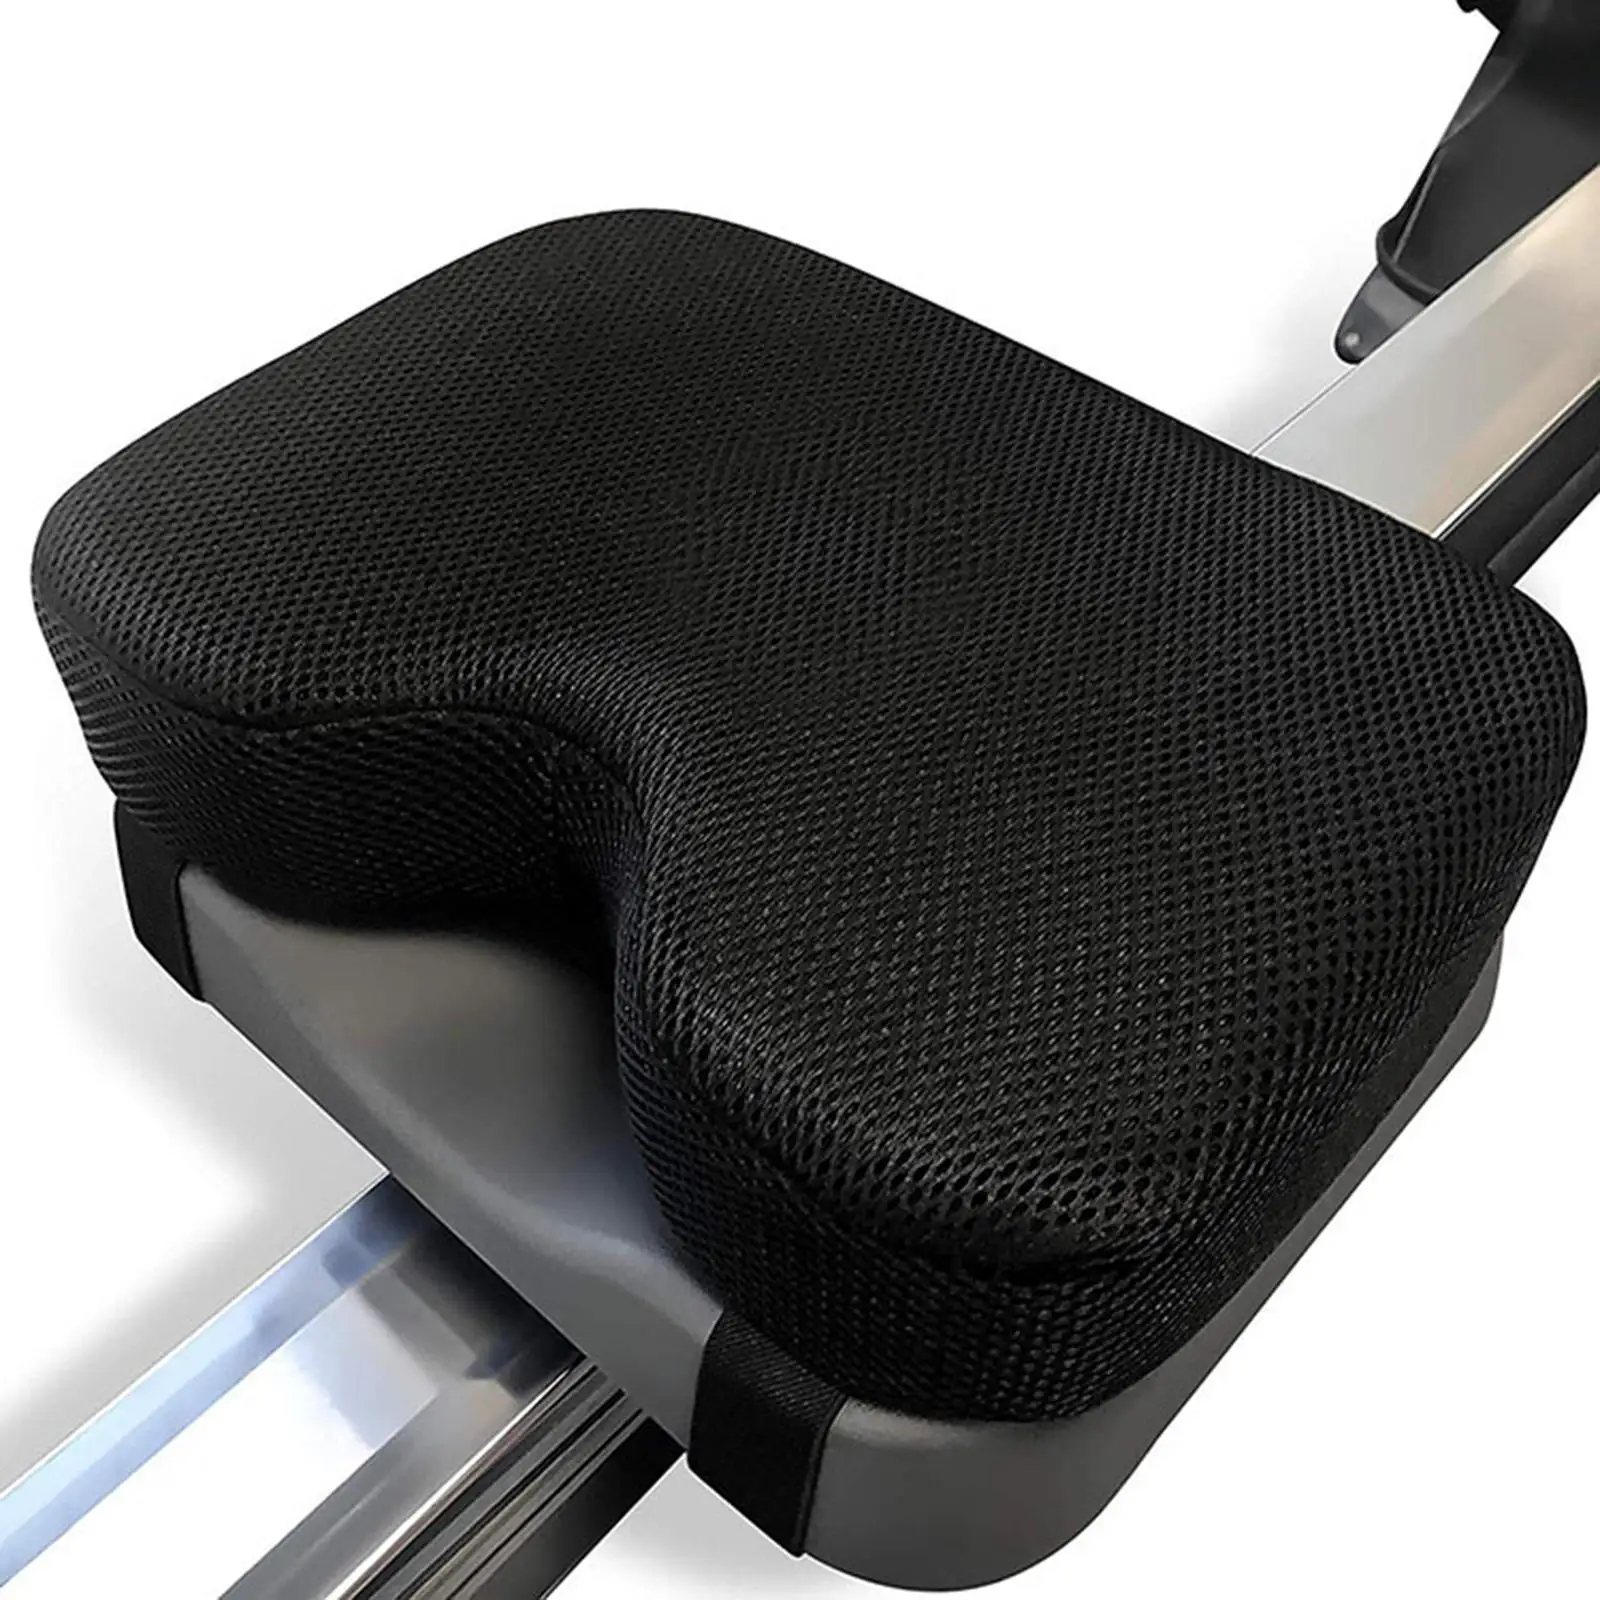 Portable Rowing Machine Seat Cushion Pad Seat Cushion Memory Foam Workout Washable Cover Seat Cushion for Workout Athlete